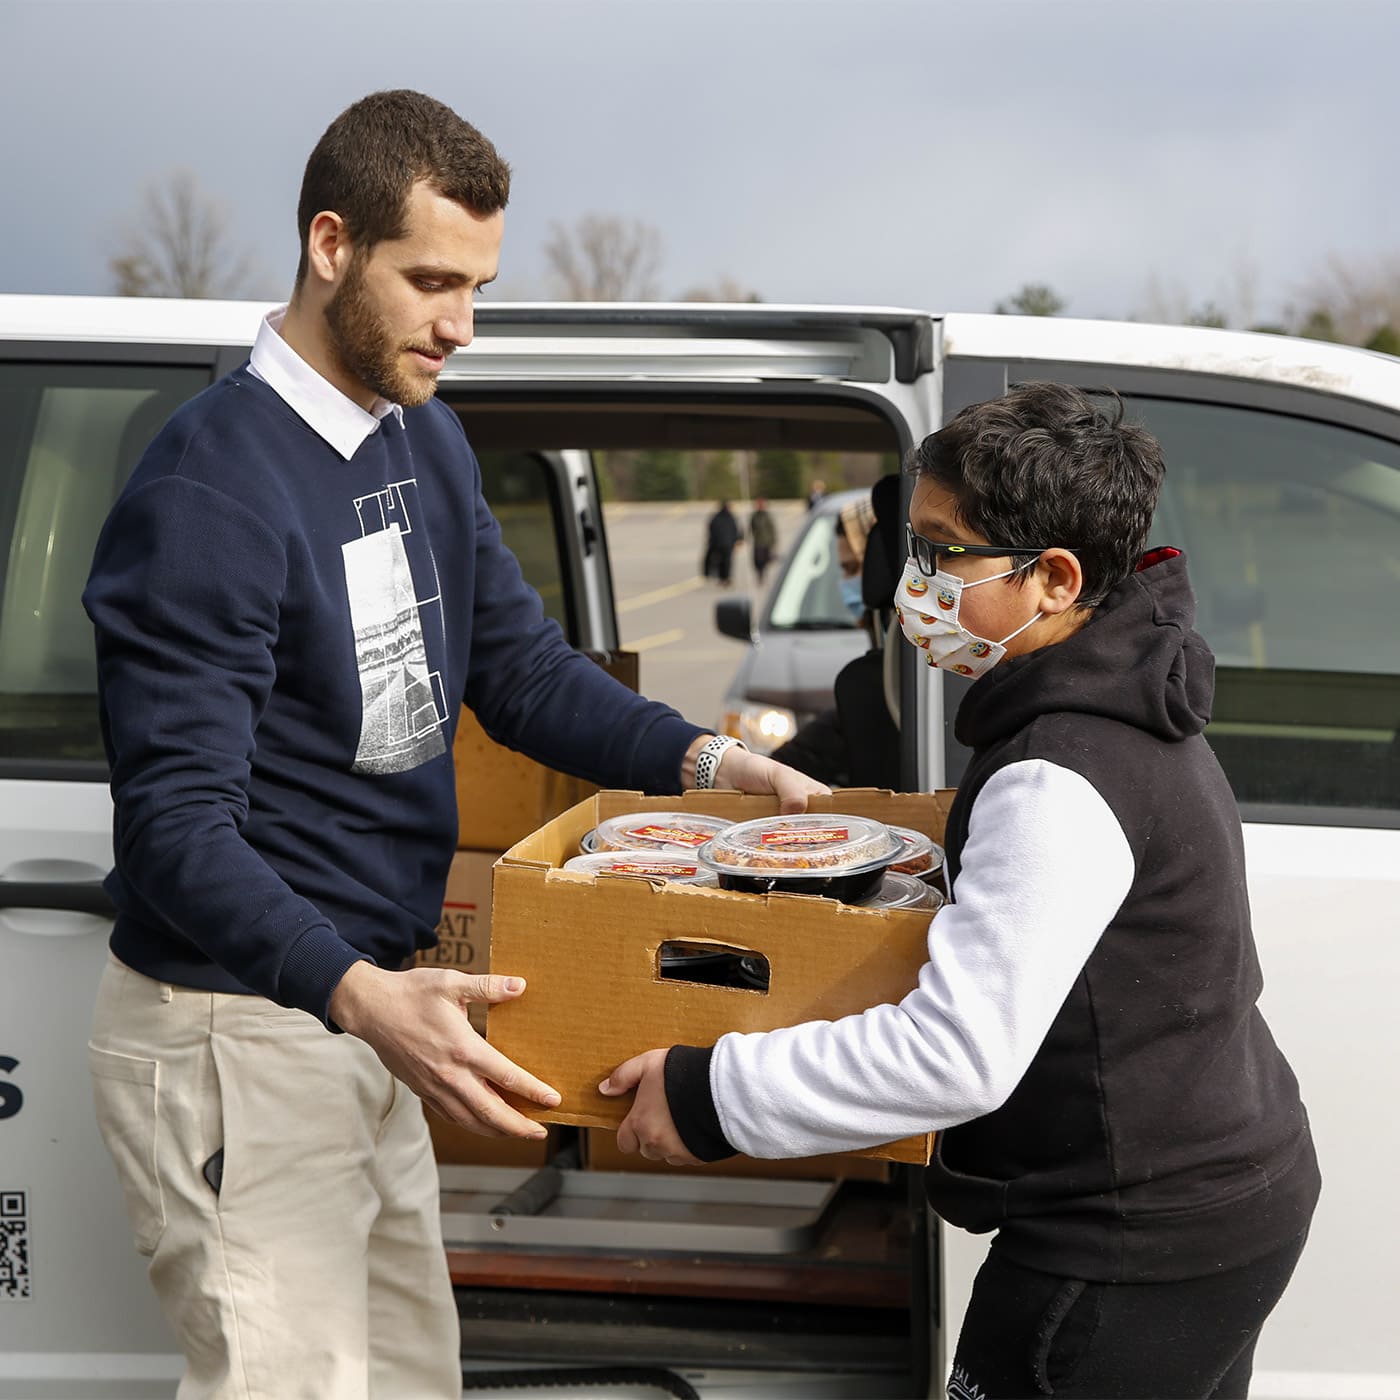 ISNA Canada volunteer distributing food to a young boy